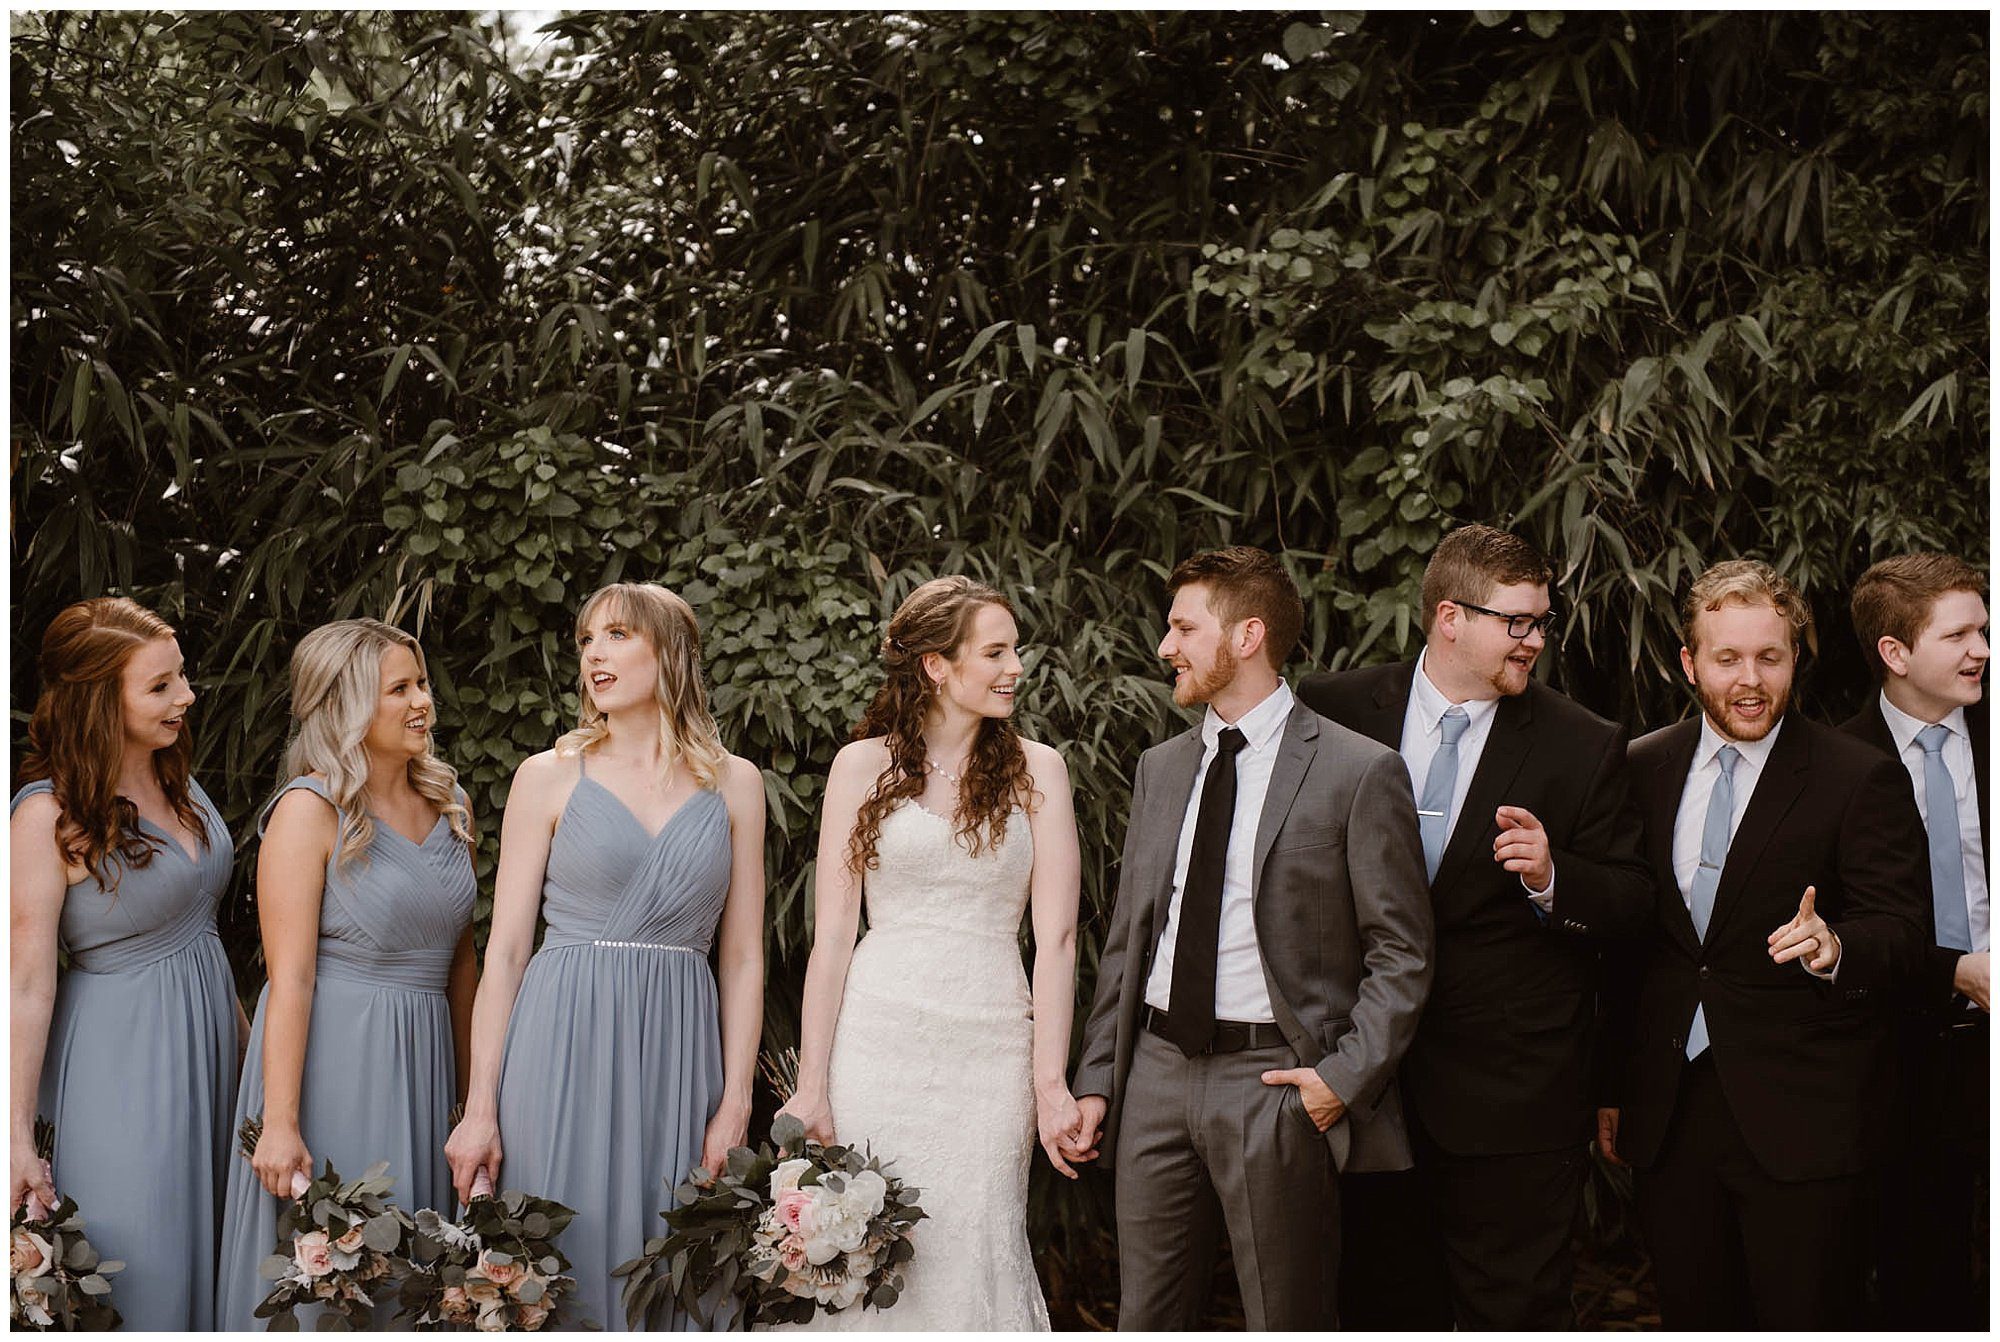 Bridal Party Photos at Crescent Bend House Knoxville